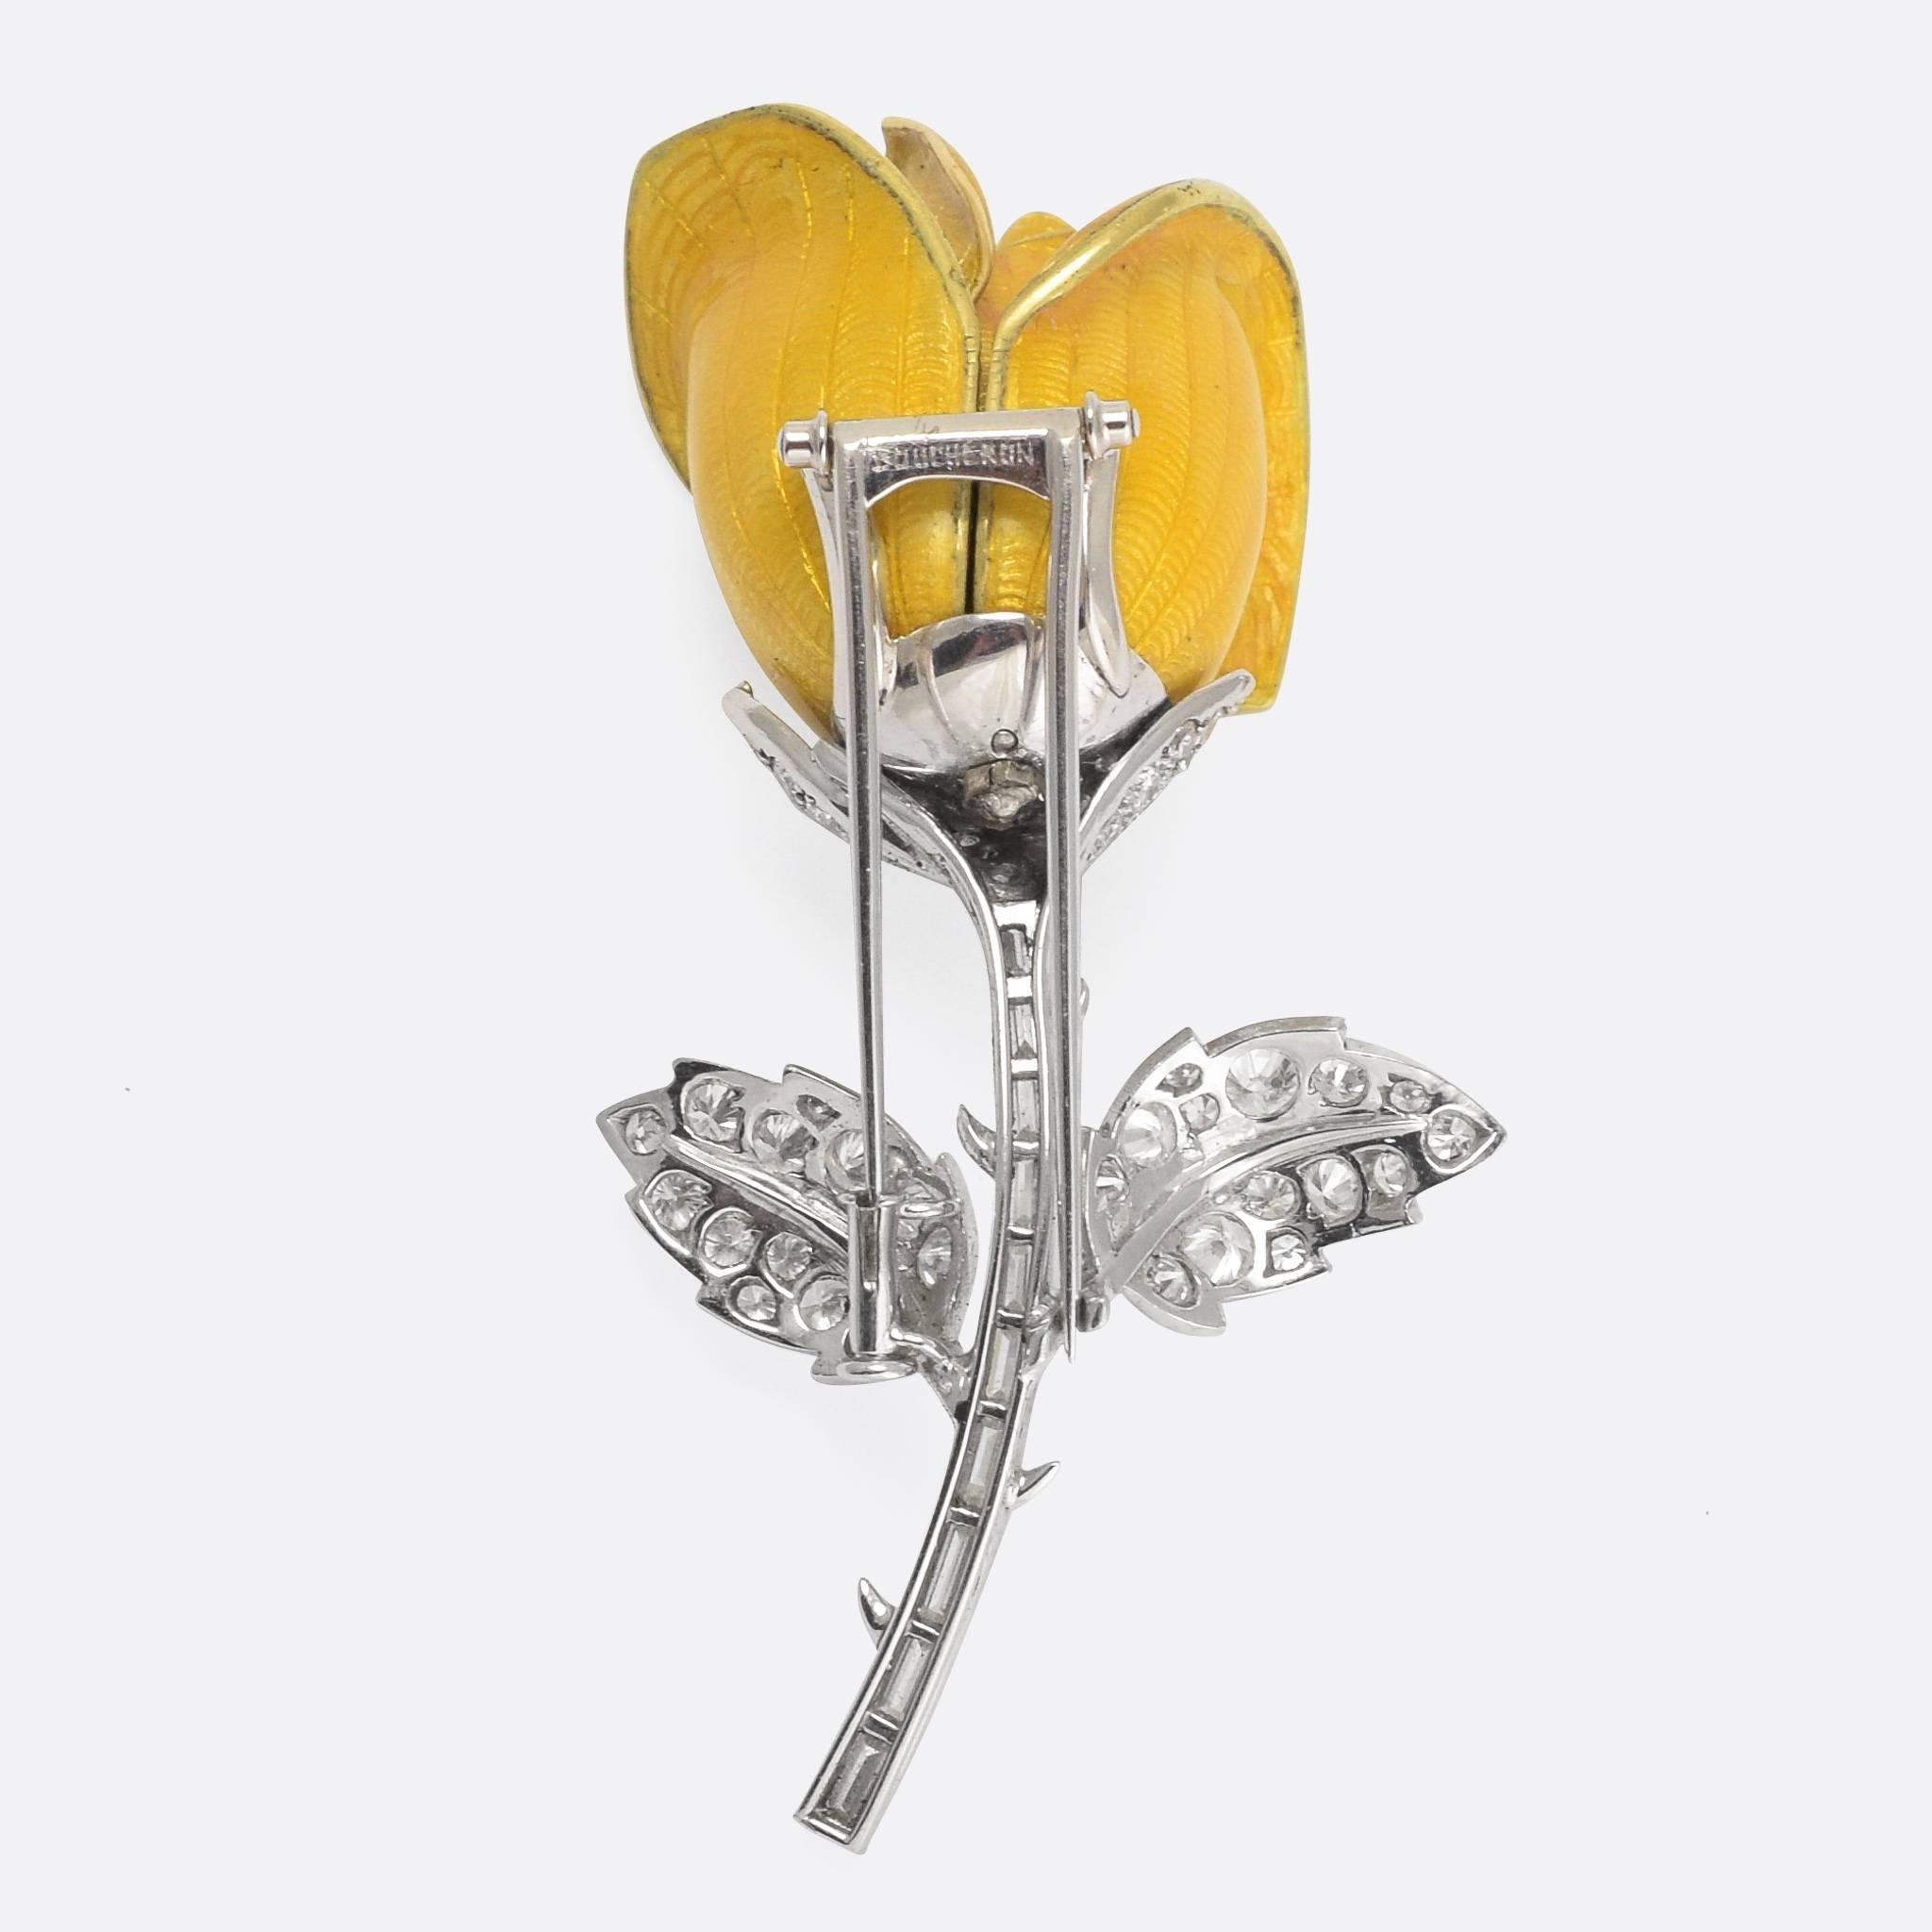 A stunning Rose brooch by Boucheron Paris, lavishly set with white diamonds and finished in vibrant yellow guilloché enamel. It dates to the 1950s, modelled in platinum and set with approx. 2.33 carats of baguette, brilliant and pear cut diamonds.